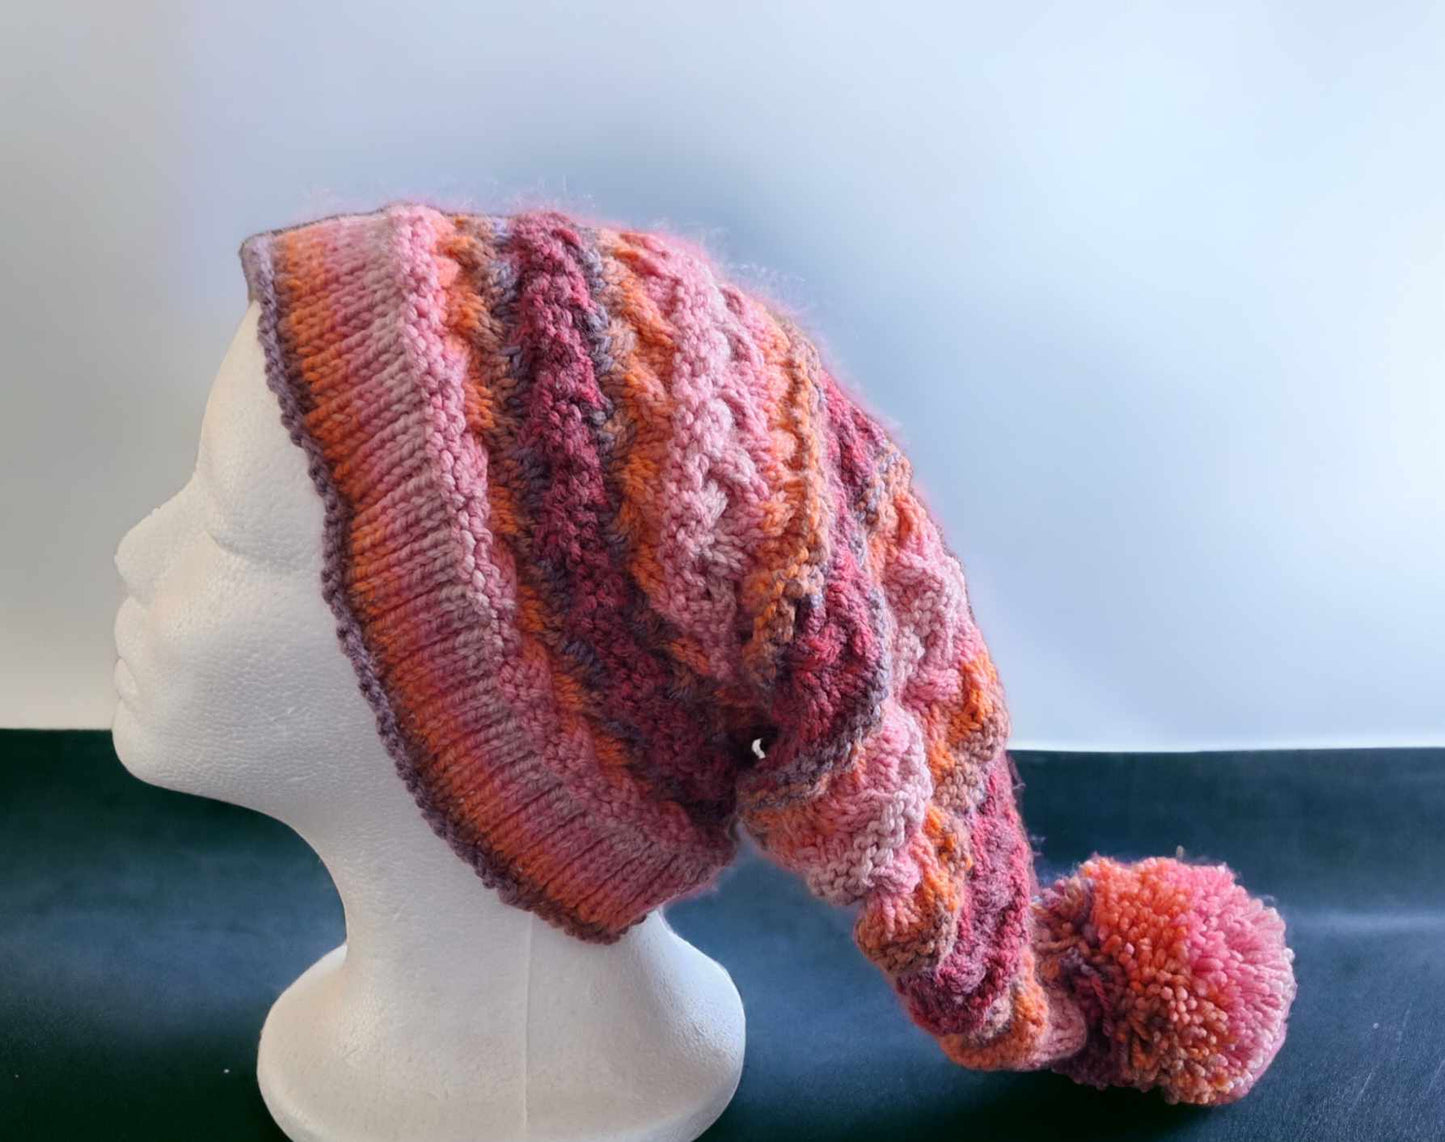  Hand Knitted Orange, Pink and Purple Pixie Hat by Free Spirit Accessories sold by Free Spirit Accessories